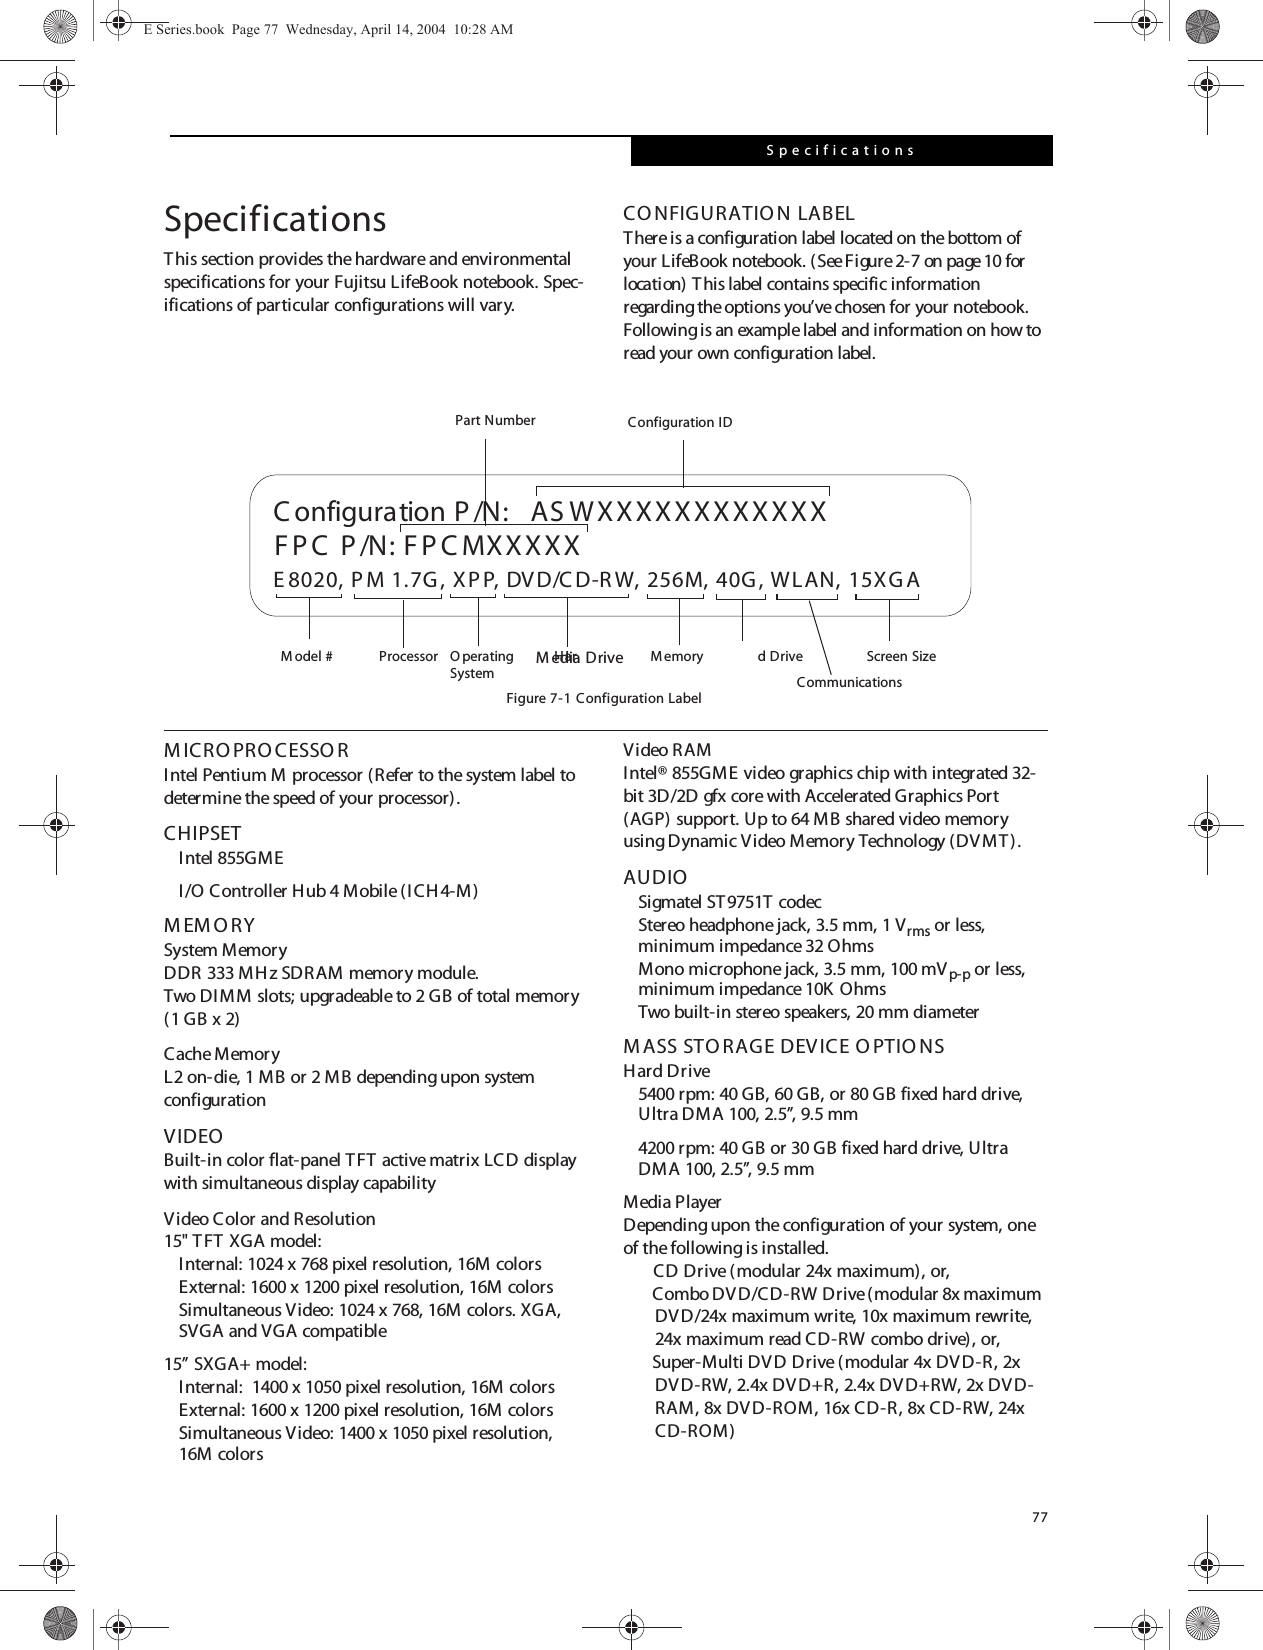 77SpecificationsSpecificationsThis section provides the hardware and environmental specifications for your Fujitsu LifeBook notebook. Spec-ifications of particular configurations will vary.CONFIGURATIO N LABELThere is a configuration label located on the bottom of your LifeBook notebook. (See Figure2-7 on page10 for location) This label contains specific information regarding the options you’ve chosen for your notebook. Following is an example label and information on how to read your own configuration label.Figure 7-1 Configuration LabelM ICRO PRO CESSO RIntel Pentium M processor (Refer to the system label to determine the speed of your processor).CHIPSETIntel 855GME I/O Controller Hub 4 Mobile (ICH4-M)M EM O RYSystem MemoryDDR 333 MHz SDRAM memory module.Two DIMM slots; upgradeable to 2 GB of total memory (1 GB x 2)Cache MemoryL2 on-die, 1 MB or 2 MB depending upon system configurationVIDEOBuilt-in color flat-panel TFT active matrix LCD display with simultaneous display capabilityVideo Color and Resolution15&quot; TFT XGA model: Internal: 1024 x 768 pixel resolution, 16M colorsExternal: 1600 x 1200 pixel resolution, 16M colorsSimultaneous Video: 1024 x 768, 16M colors. XGA, SVGA and VGA compatible15” SXGA+ model:Internal:  1400 x 1050 pixel resolution, 16M colorsExternal: 1600 x 1200 pixel resolution, 16M colorsSimultaneous Video: 1400 x 1050 pixel resolution, 16M colorsVideo R AMIntel® 855GME video graphics chip with integrated 32-bit 3D/2D gfx core with Accelerated Graphics Port (AGP) support. Up to 64 MB shared video memory using Dynamic Video Memory Technology (DVMT). AUDIOSigmatel ST9751T codecStereo headphone jack, 3.5 mm, 1 Vrms or less, minimum impedance 32 OhmsMono microphone jack, 3.5 mm, 100 mVp-p or less, minimum impedance 10K  OhmsTwo built-in stereo speakers, 20 mm diameterM ASS STO RAGE DEVICE O PTIO NSHard Drive5400 rpm: 40 GB, 60 GB, or 80 GB fixed hard drive, Ultra DMA 100, 2.5”, 9.5 mm4200 rpm: 40 GB or 30 GB fixed hard drive, Ultra DMA 100, 2.5”, 9.5 mmMedia PlayerDepending upon the configuration of your system, one of the following is installed.CD Drive (modular 24x maximum), or,Combo DVD/CD-RW Drive (modular 8x maximum DVD/24x maximum write, 10x maximum rewrite, 24x maximum read CD-RW combo drive), or,Super-Multi DVD Drive (modular 4x DVD-R, 2x DVD-RW, 2.4x DVD+R, 2.4x DVD+RW, 2x DVD-RAM, 8x DVD-ROM, 16x CD-R, 8x CD-RW, 24x CD-ROM)  ASWXXXXXXXXXXXXE 8020, P M 1.7G , XPP, DVD/C D-R W, 256M, 40G, WLAN, 15XG AFPC  P /N: F P C MXXXXXC onfiguration P /N:O perating Har d Drive Configuration IDPart NumberProcessorM odel # Screen SizeM emorySystem CommunicationsM edia DriveE Series.book  Page 77  Wednesday, April 14, 2004  10:28 AM